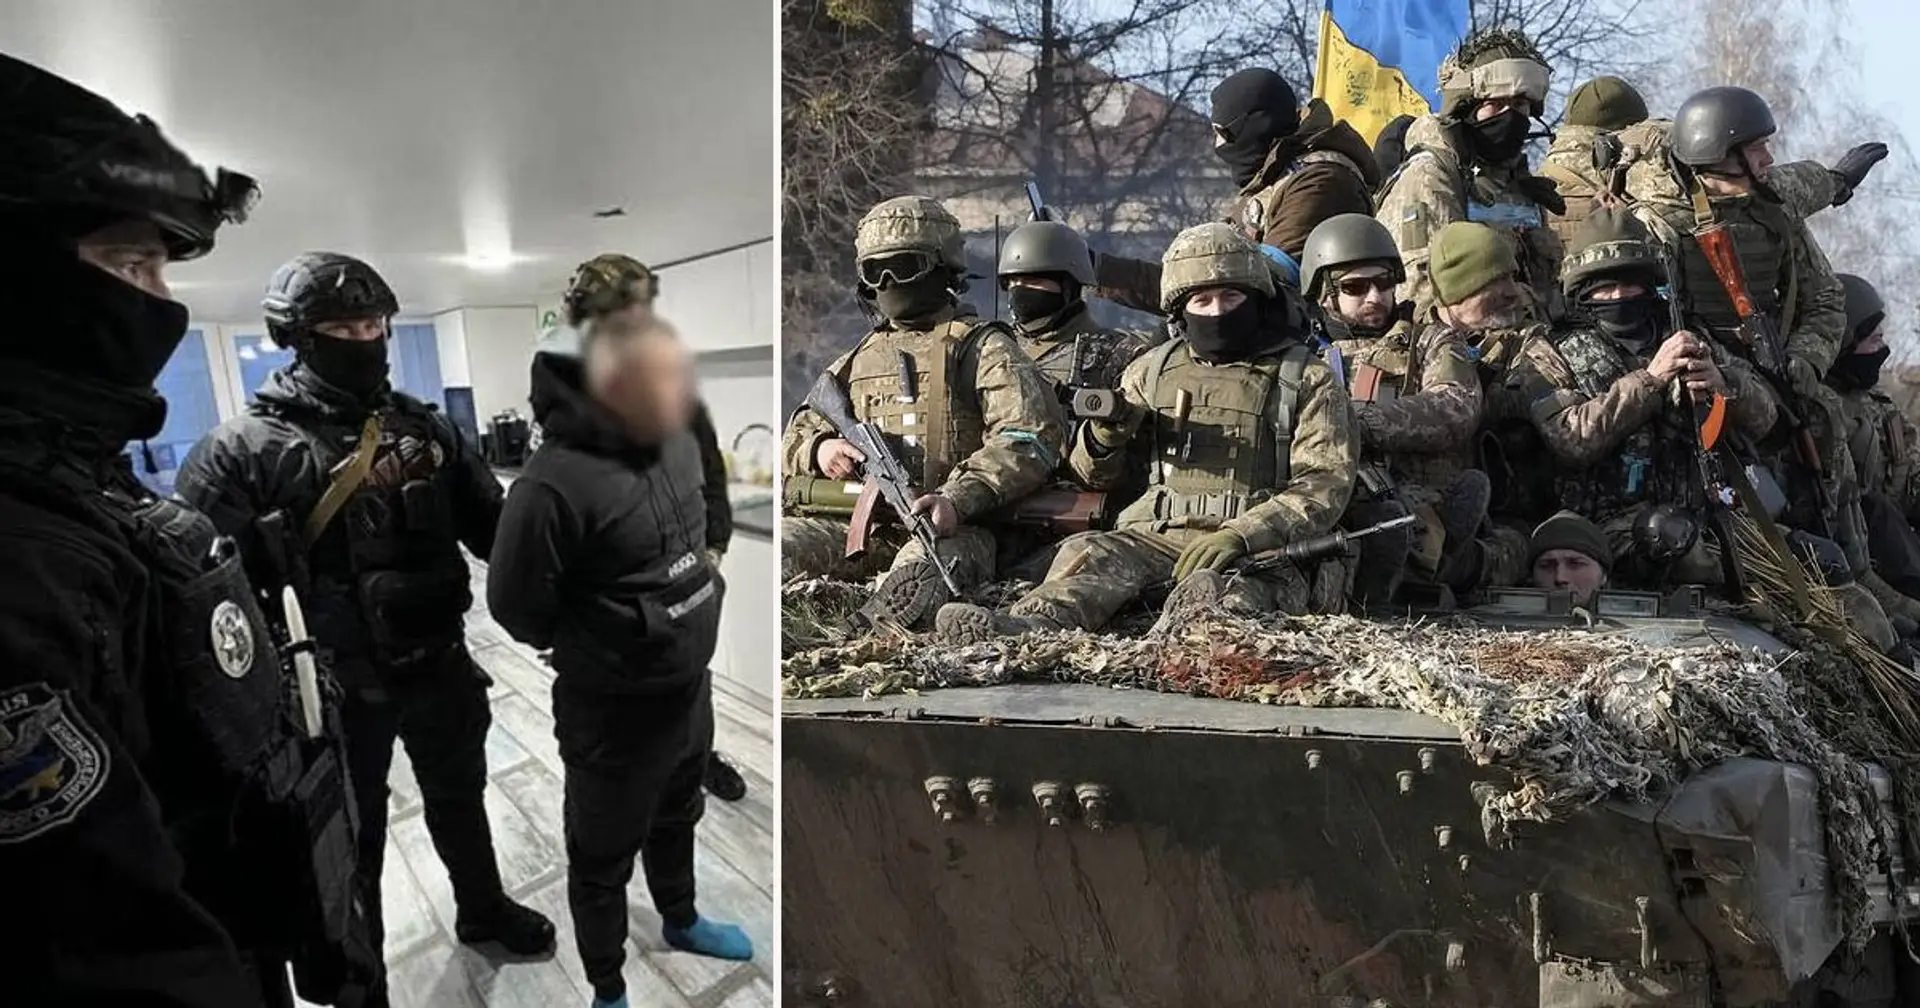 Swindler arrested in Ukraine for collecting 'donations' for army and spending them on gambling